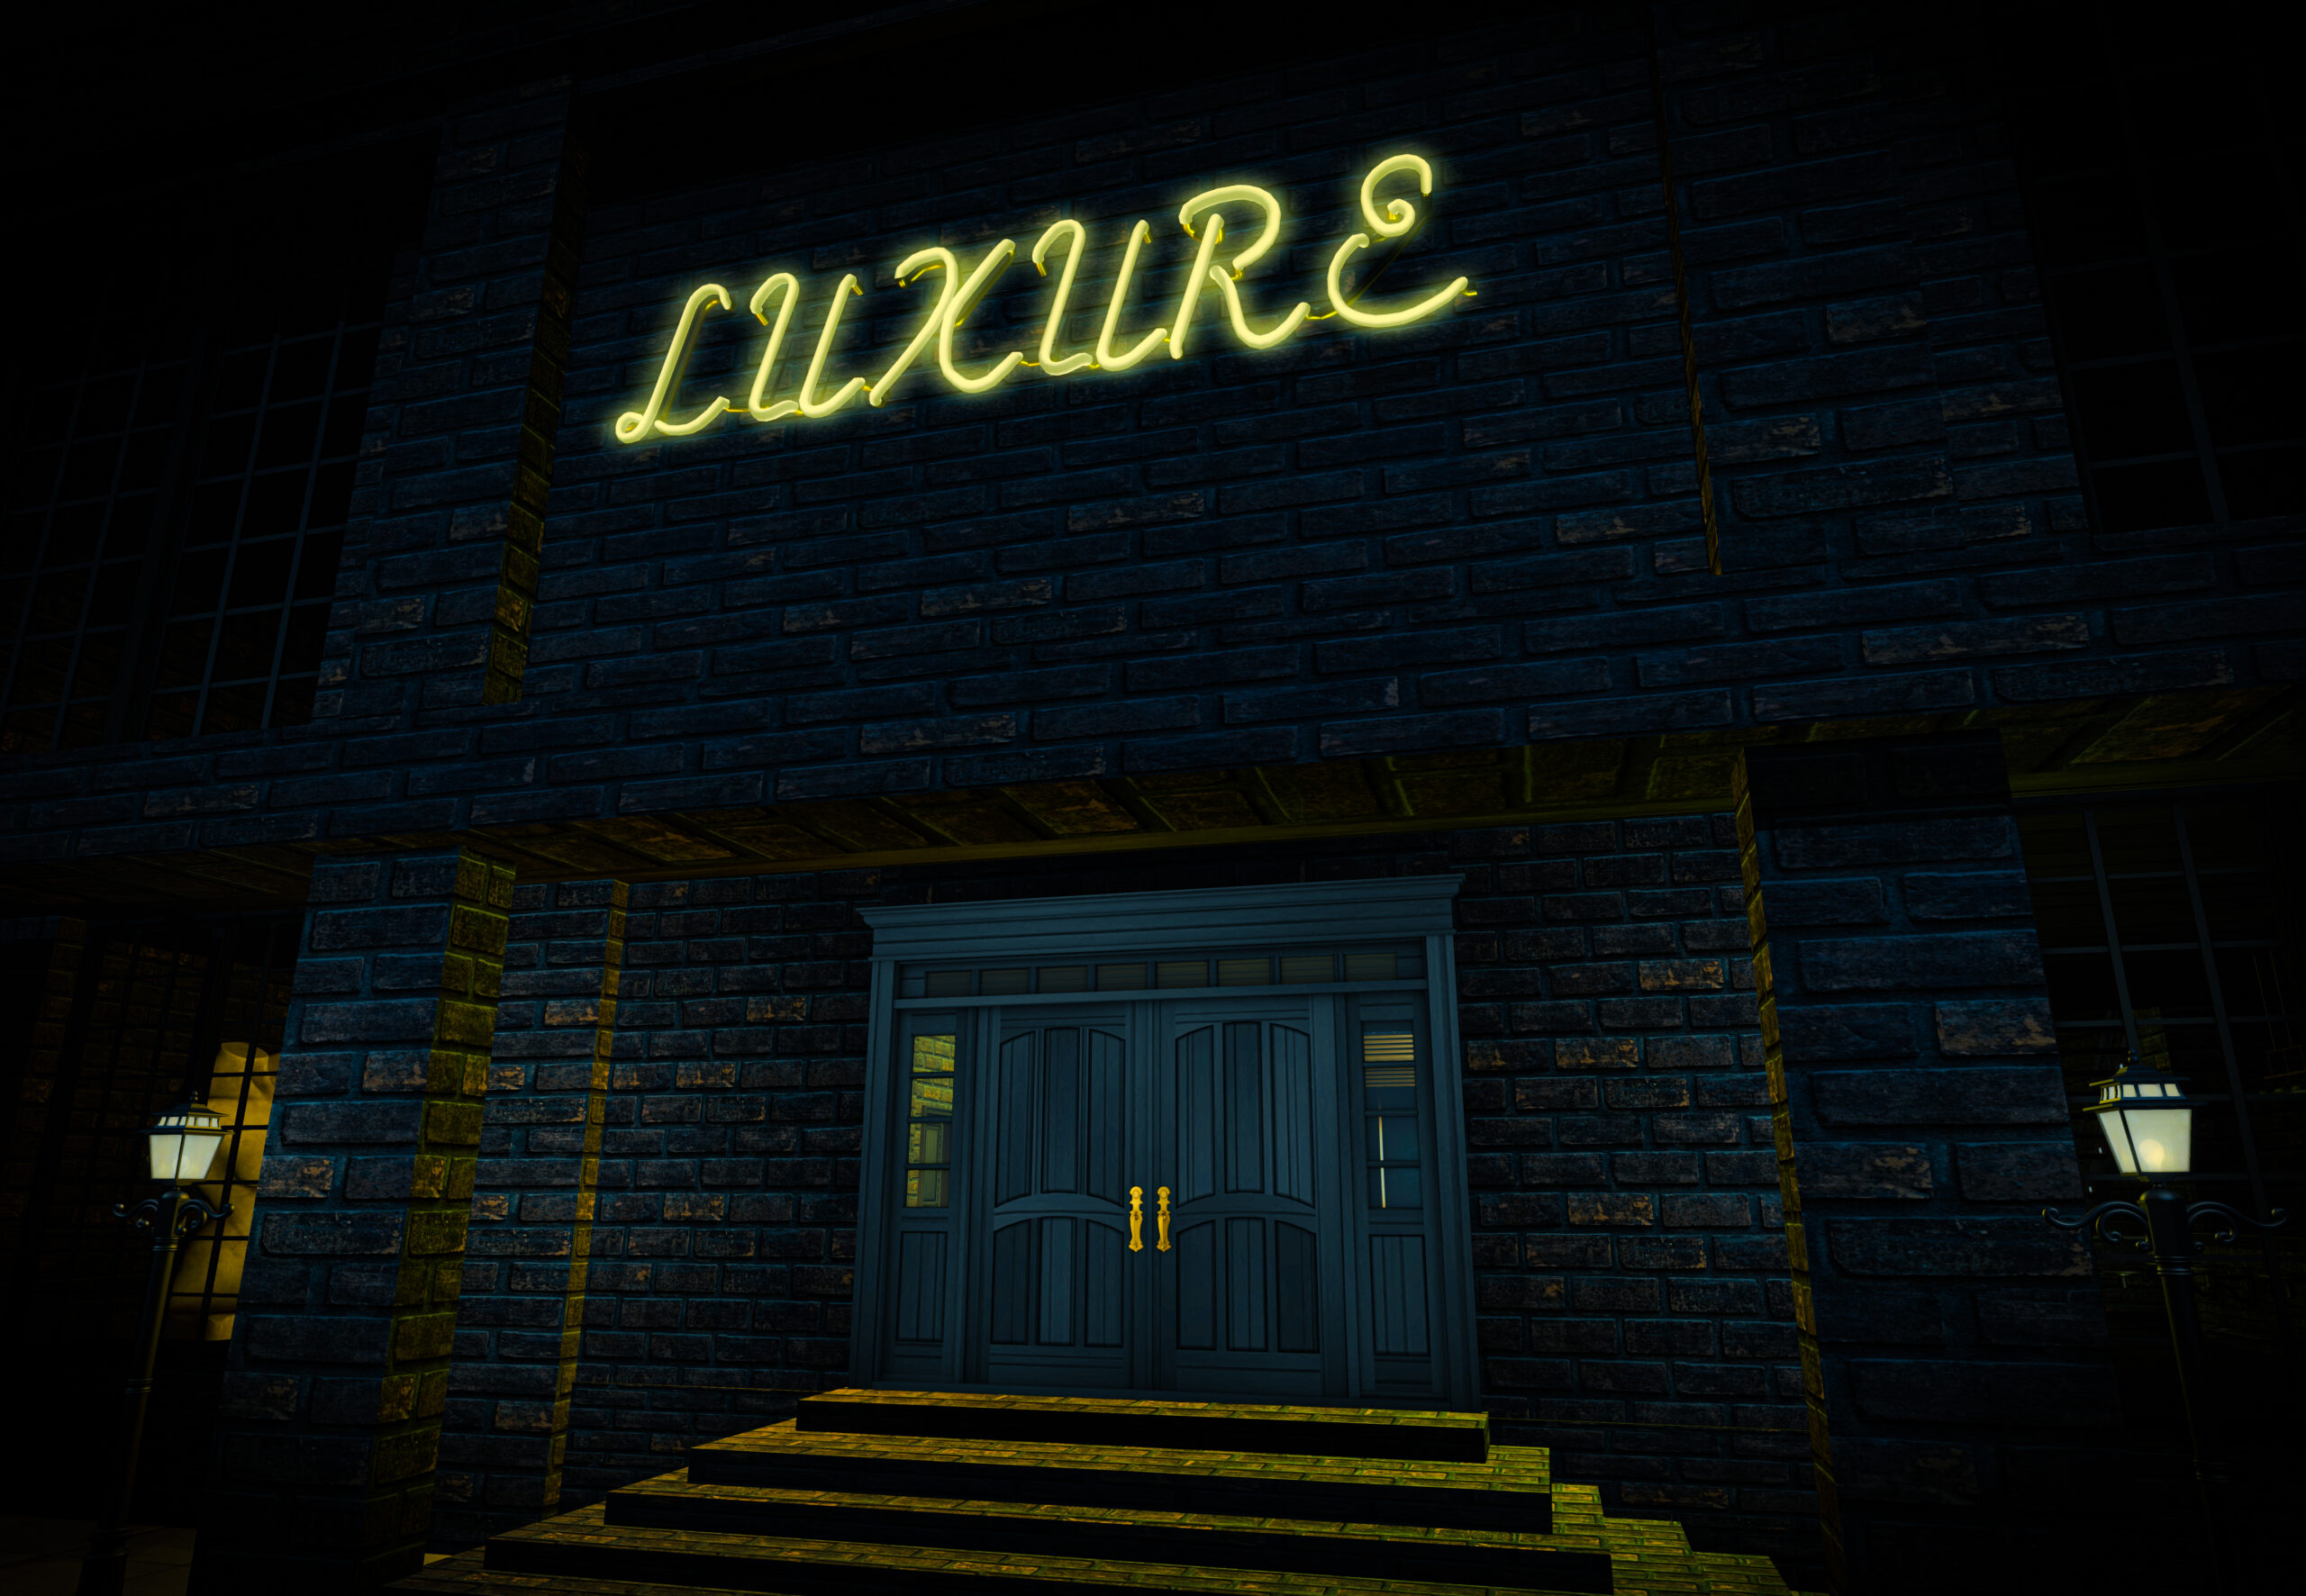 The entrance to club Luxure - owned by the Lion Family